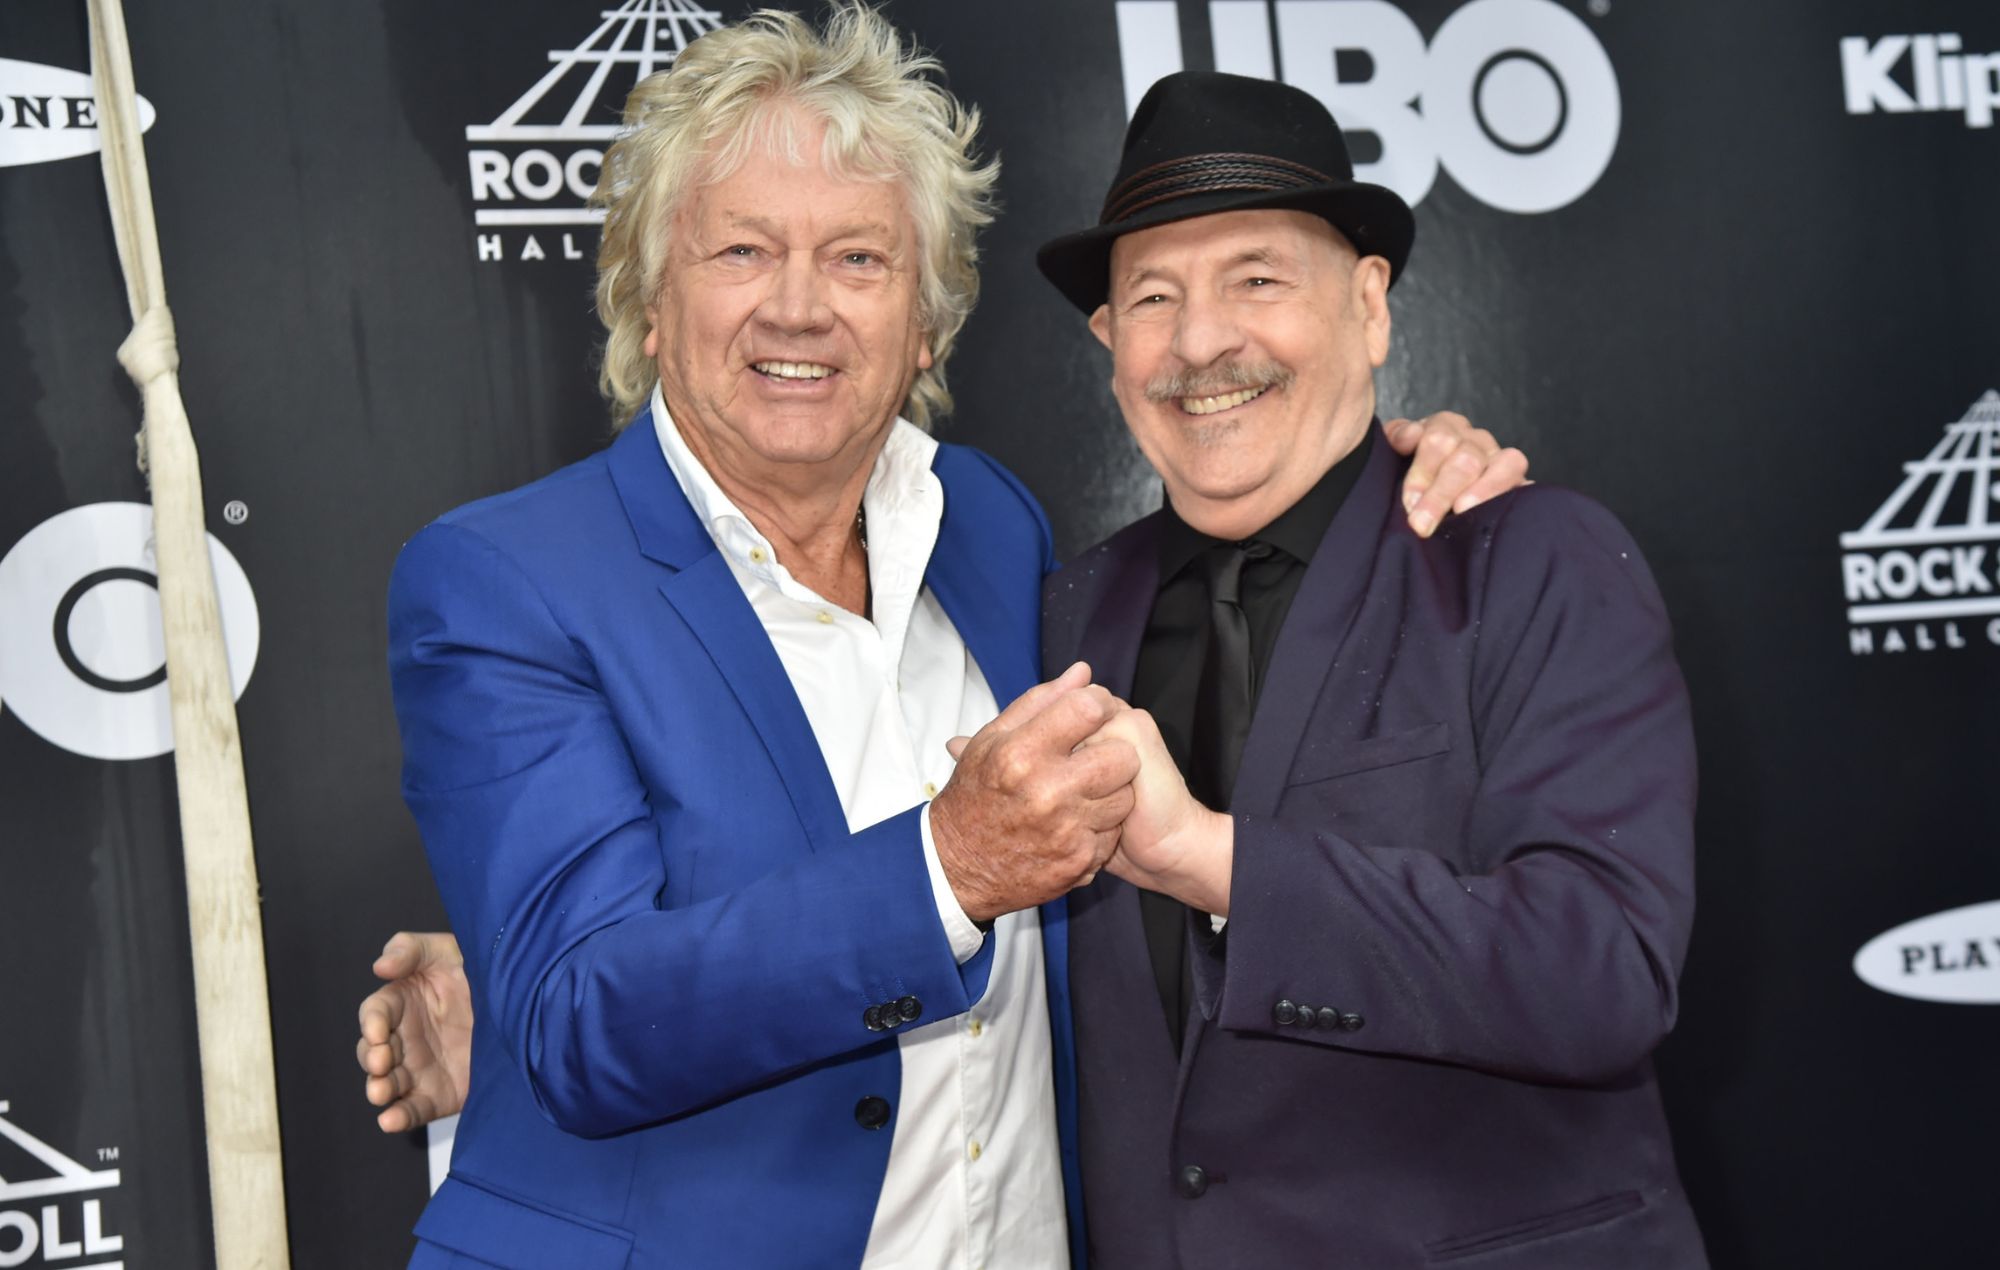 John Lodge and Mike Pinder of The Moody Blues attend the 33rd Annual Rock & Roll Hall of Fame Induction Ceremony at Public Auditorium on April 14, 2018 in Cleveland, Ohio.